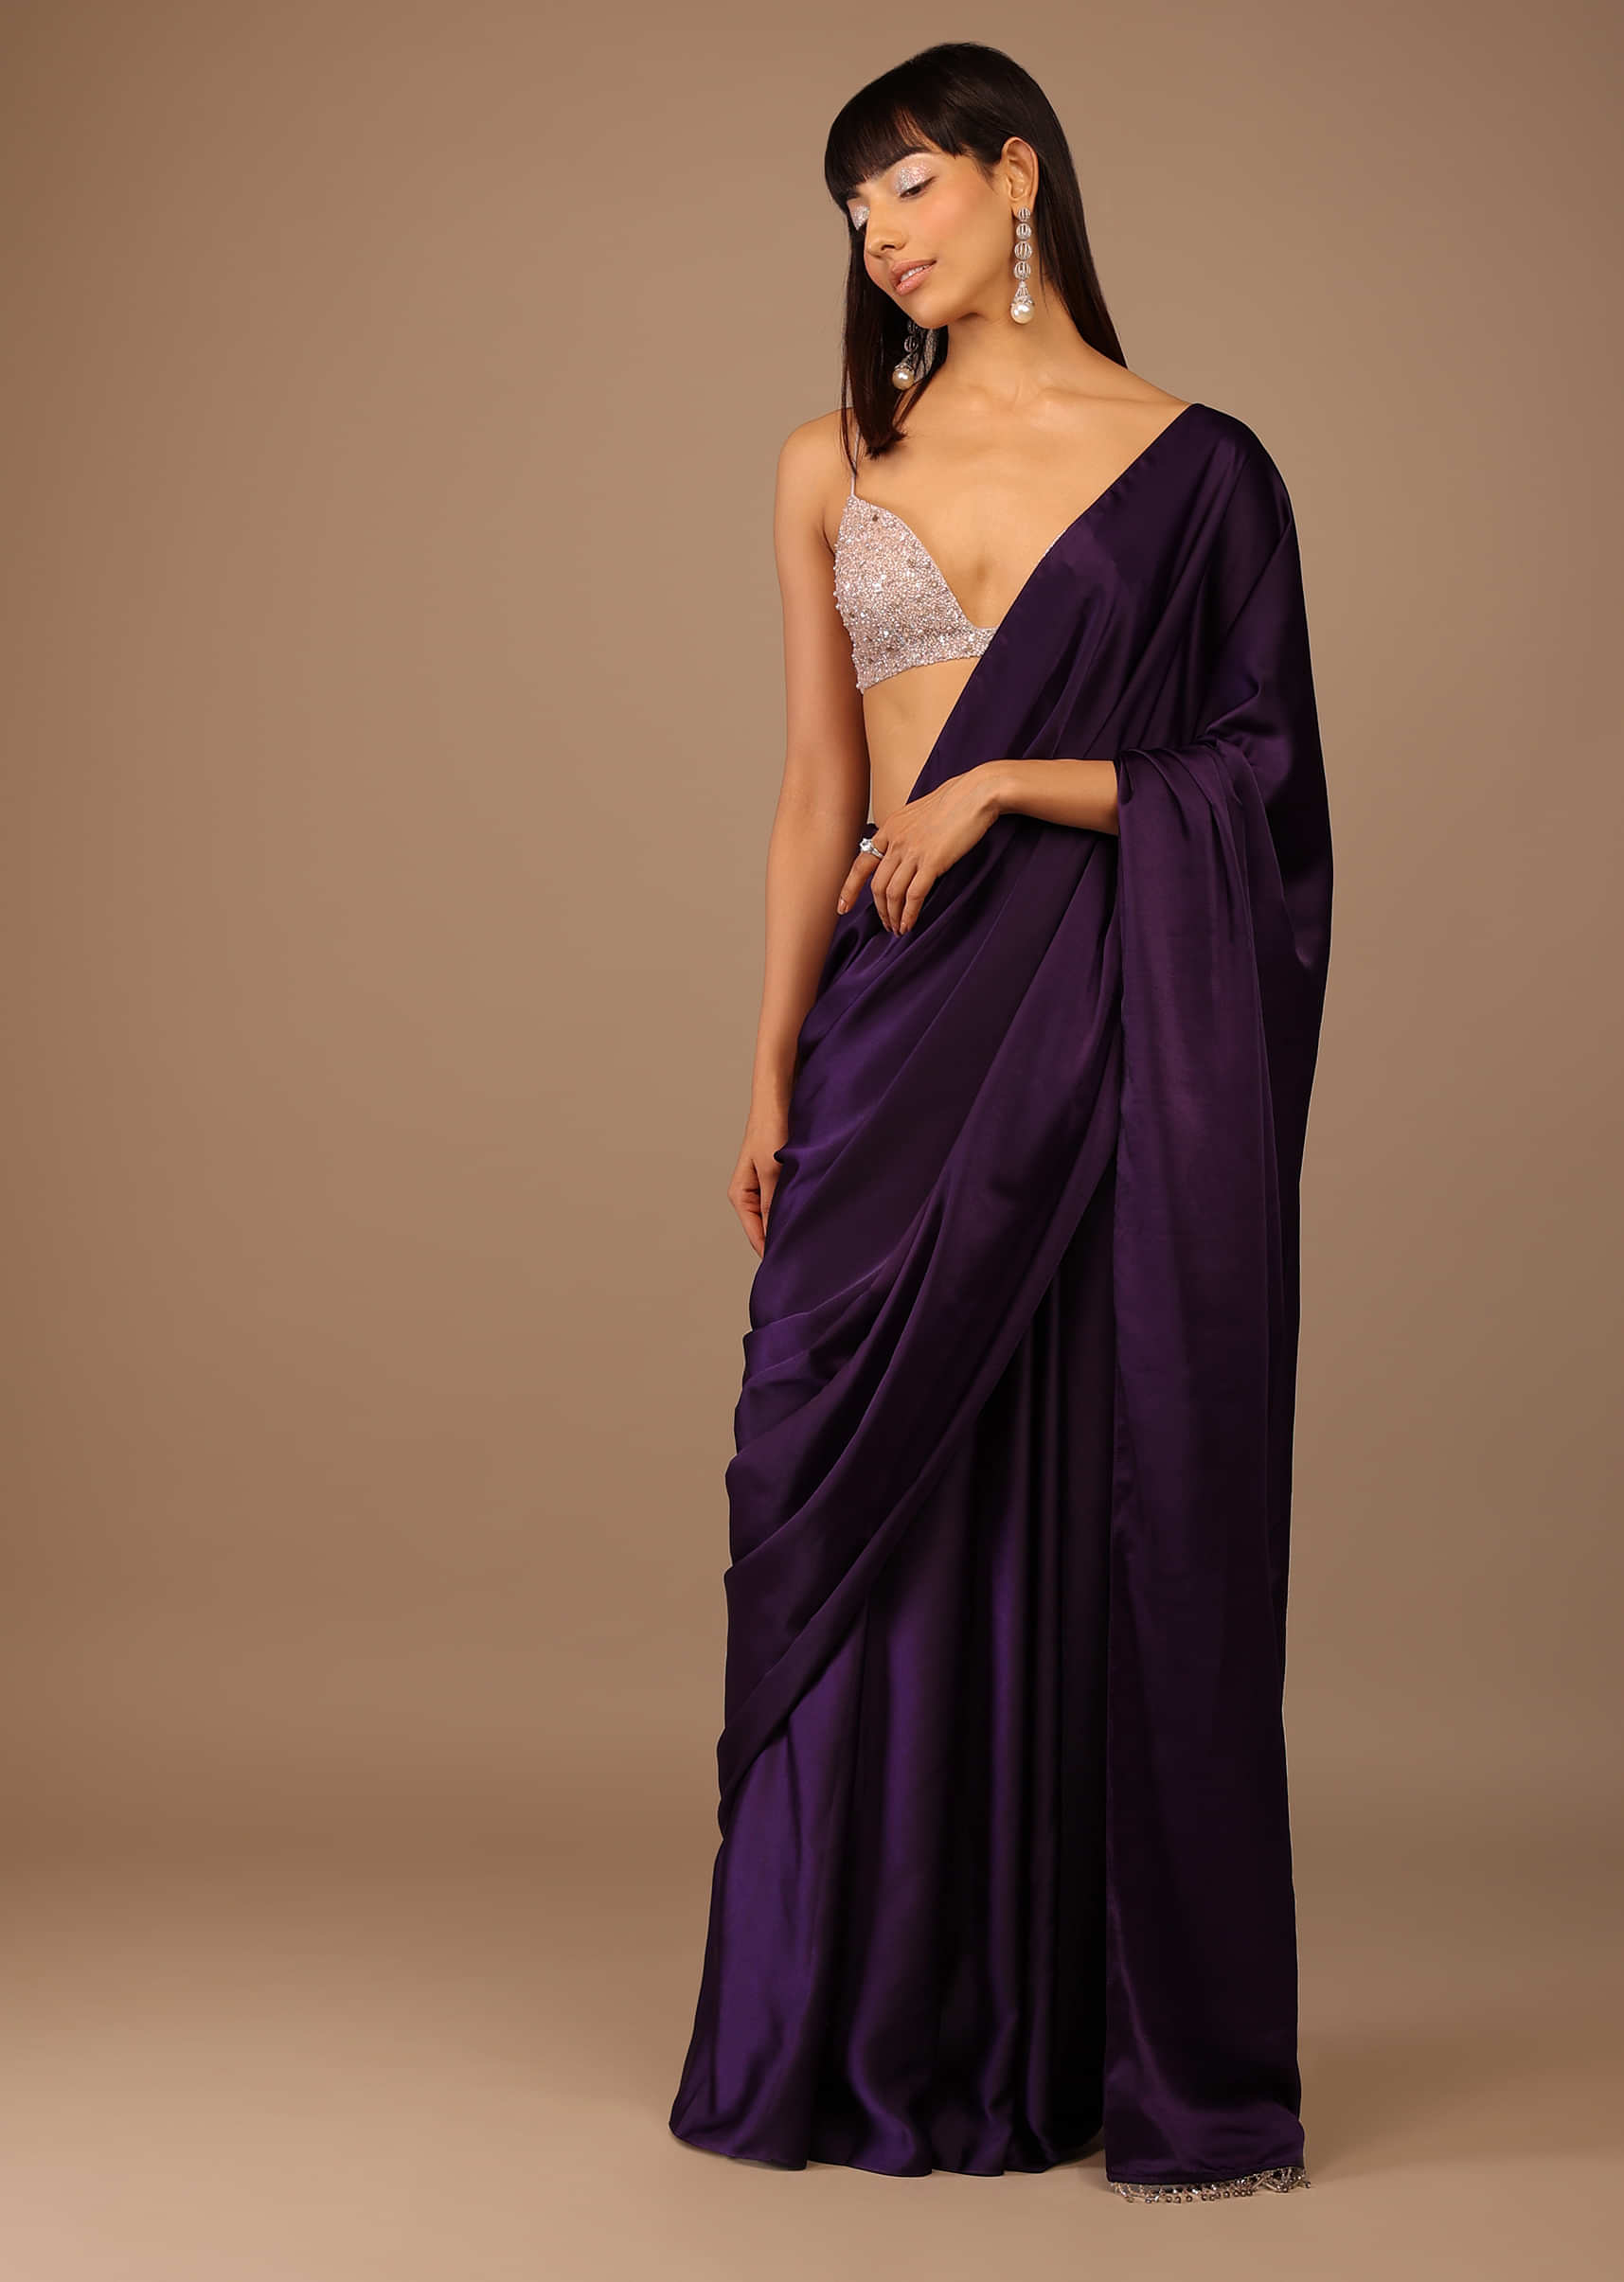 Purple Satin Saree With Hand Embroidered Bustier With A Plunging Neck Line